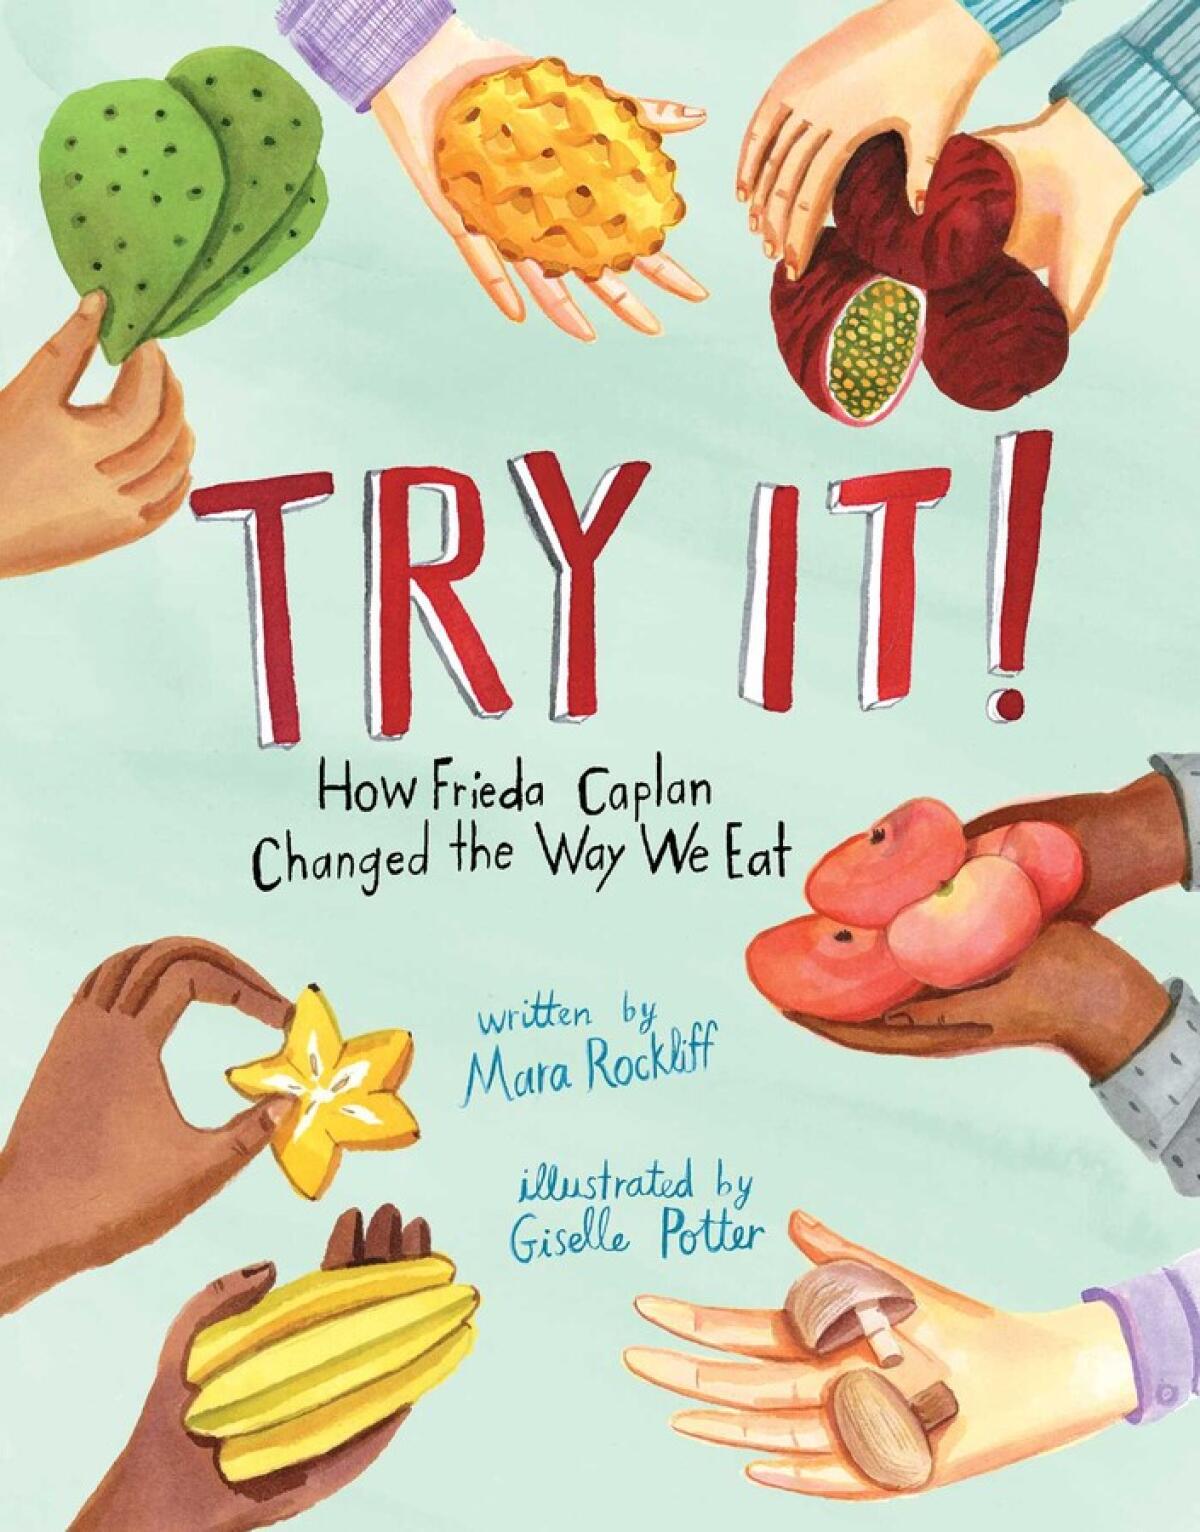 “Try It! How Frieda Caplan Changed the Way We Eat,” by Mara Rockliff